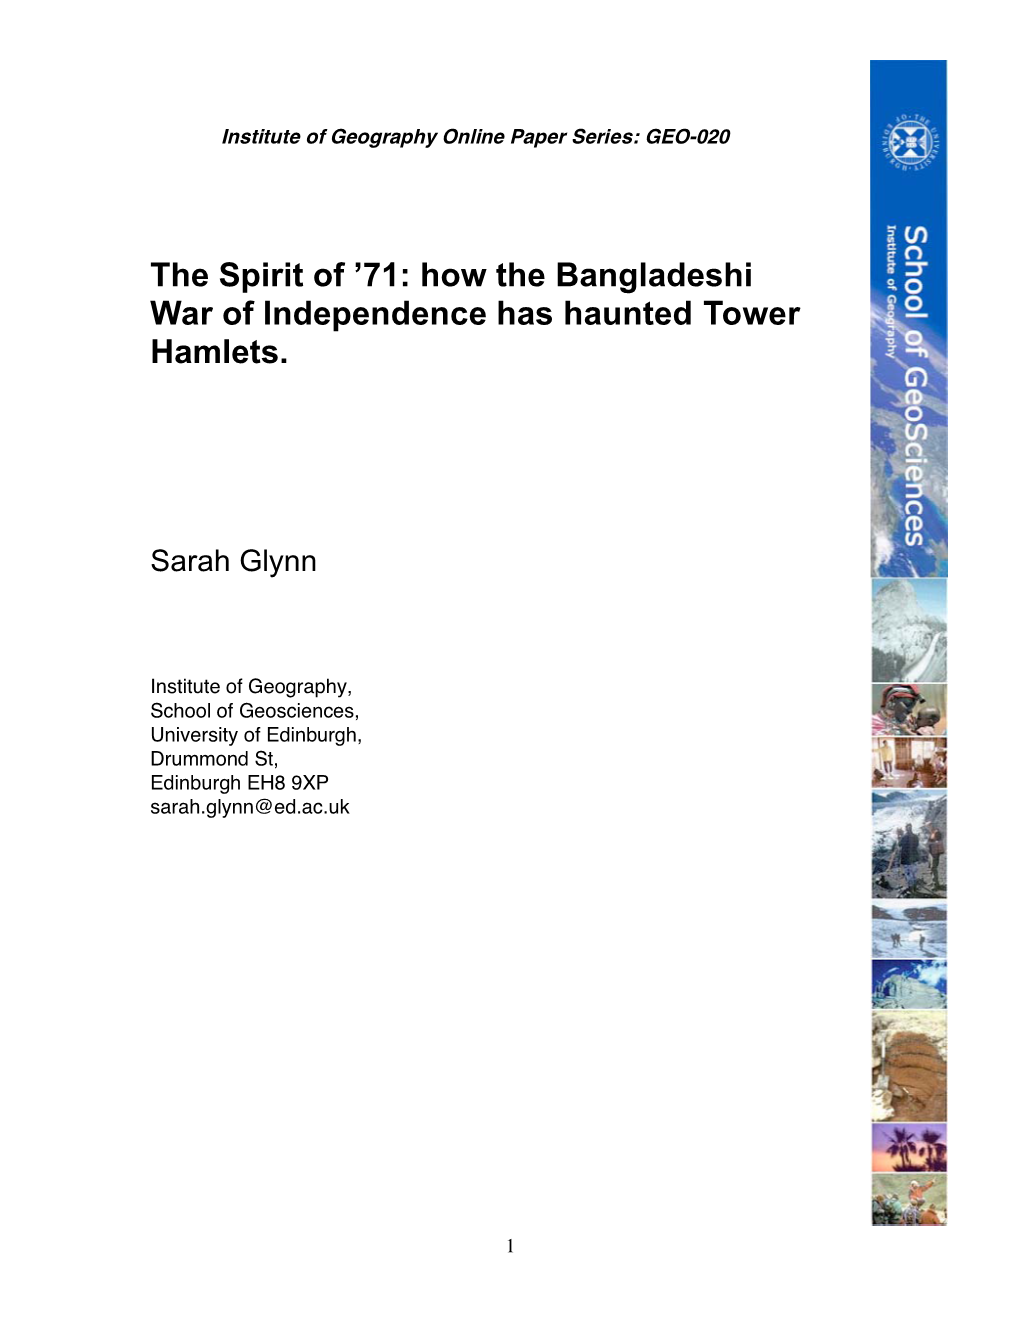 71: How the Bangladeshi War of Independence Has Haunted Tower Hamlets